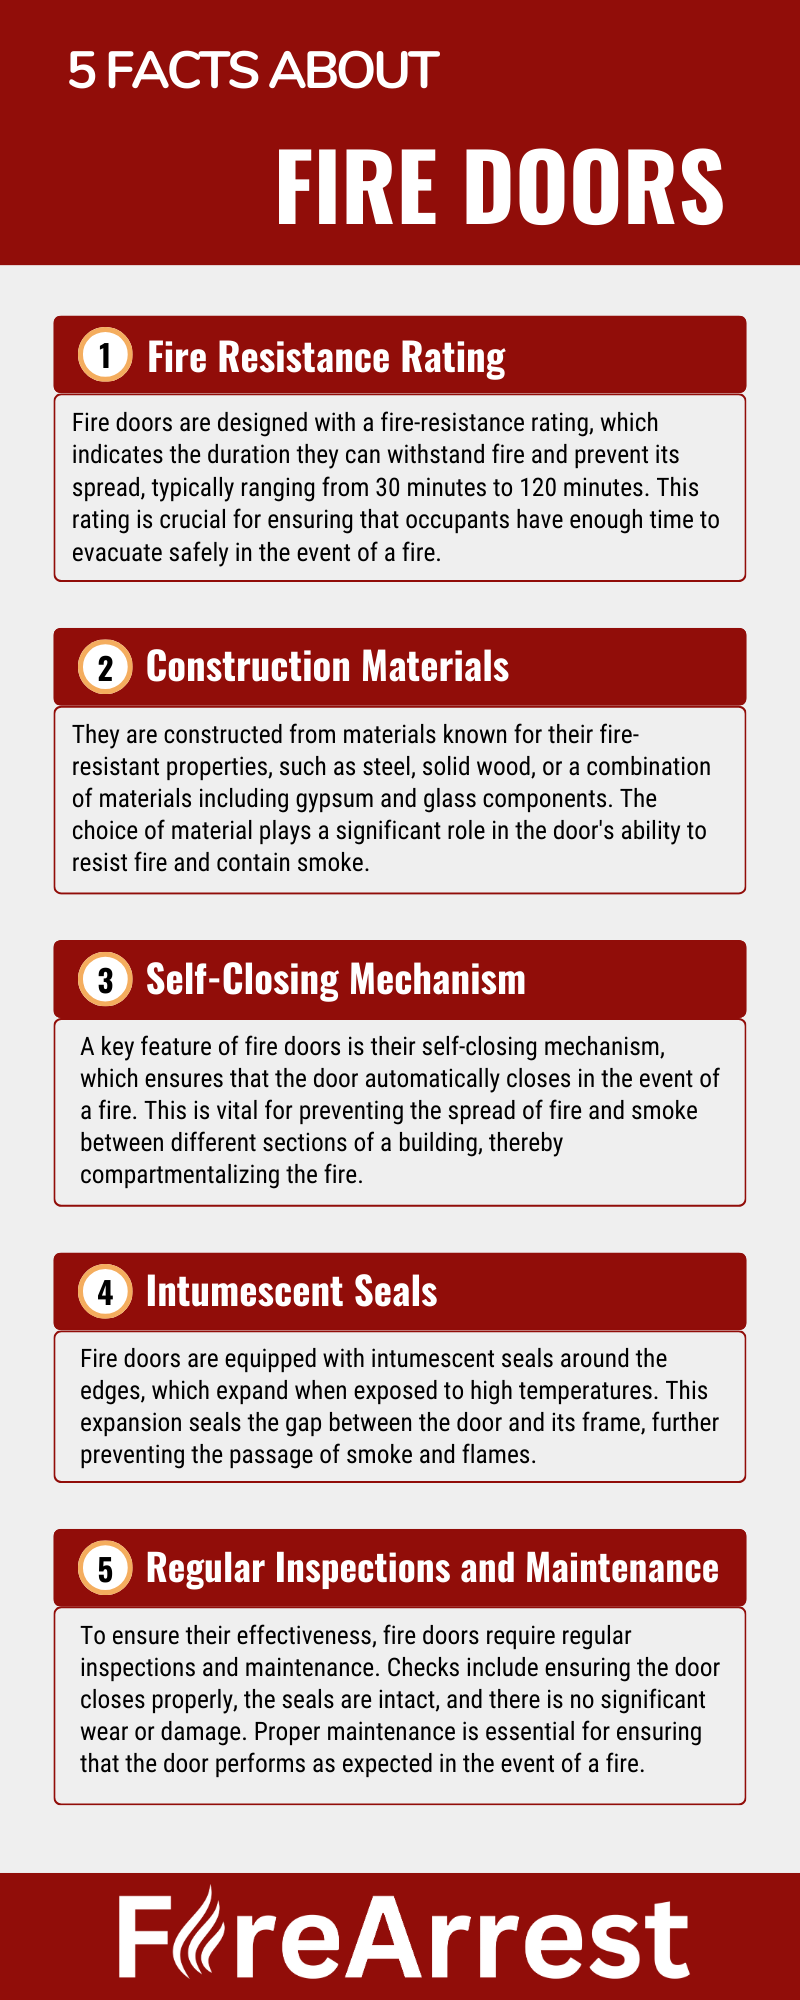 5 Facts About Fire Doors Infographic